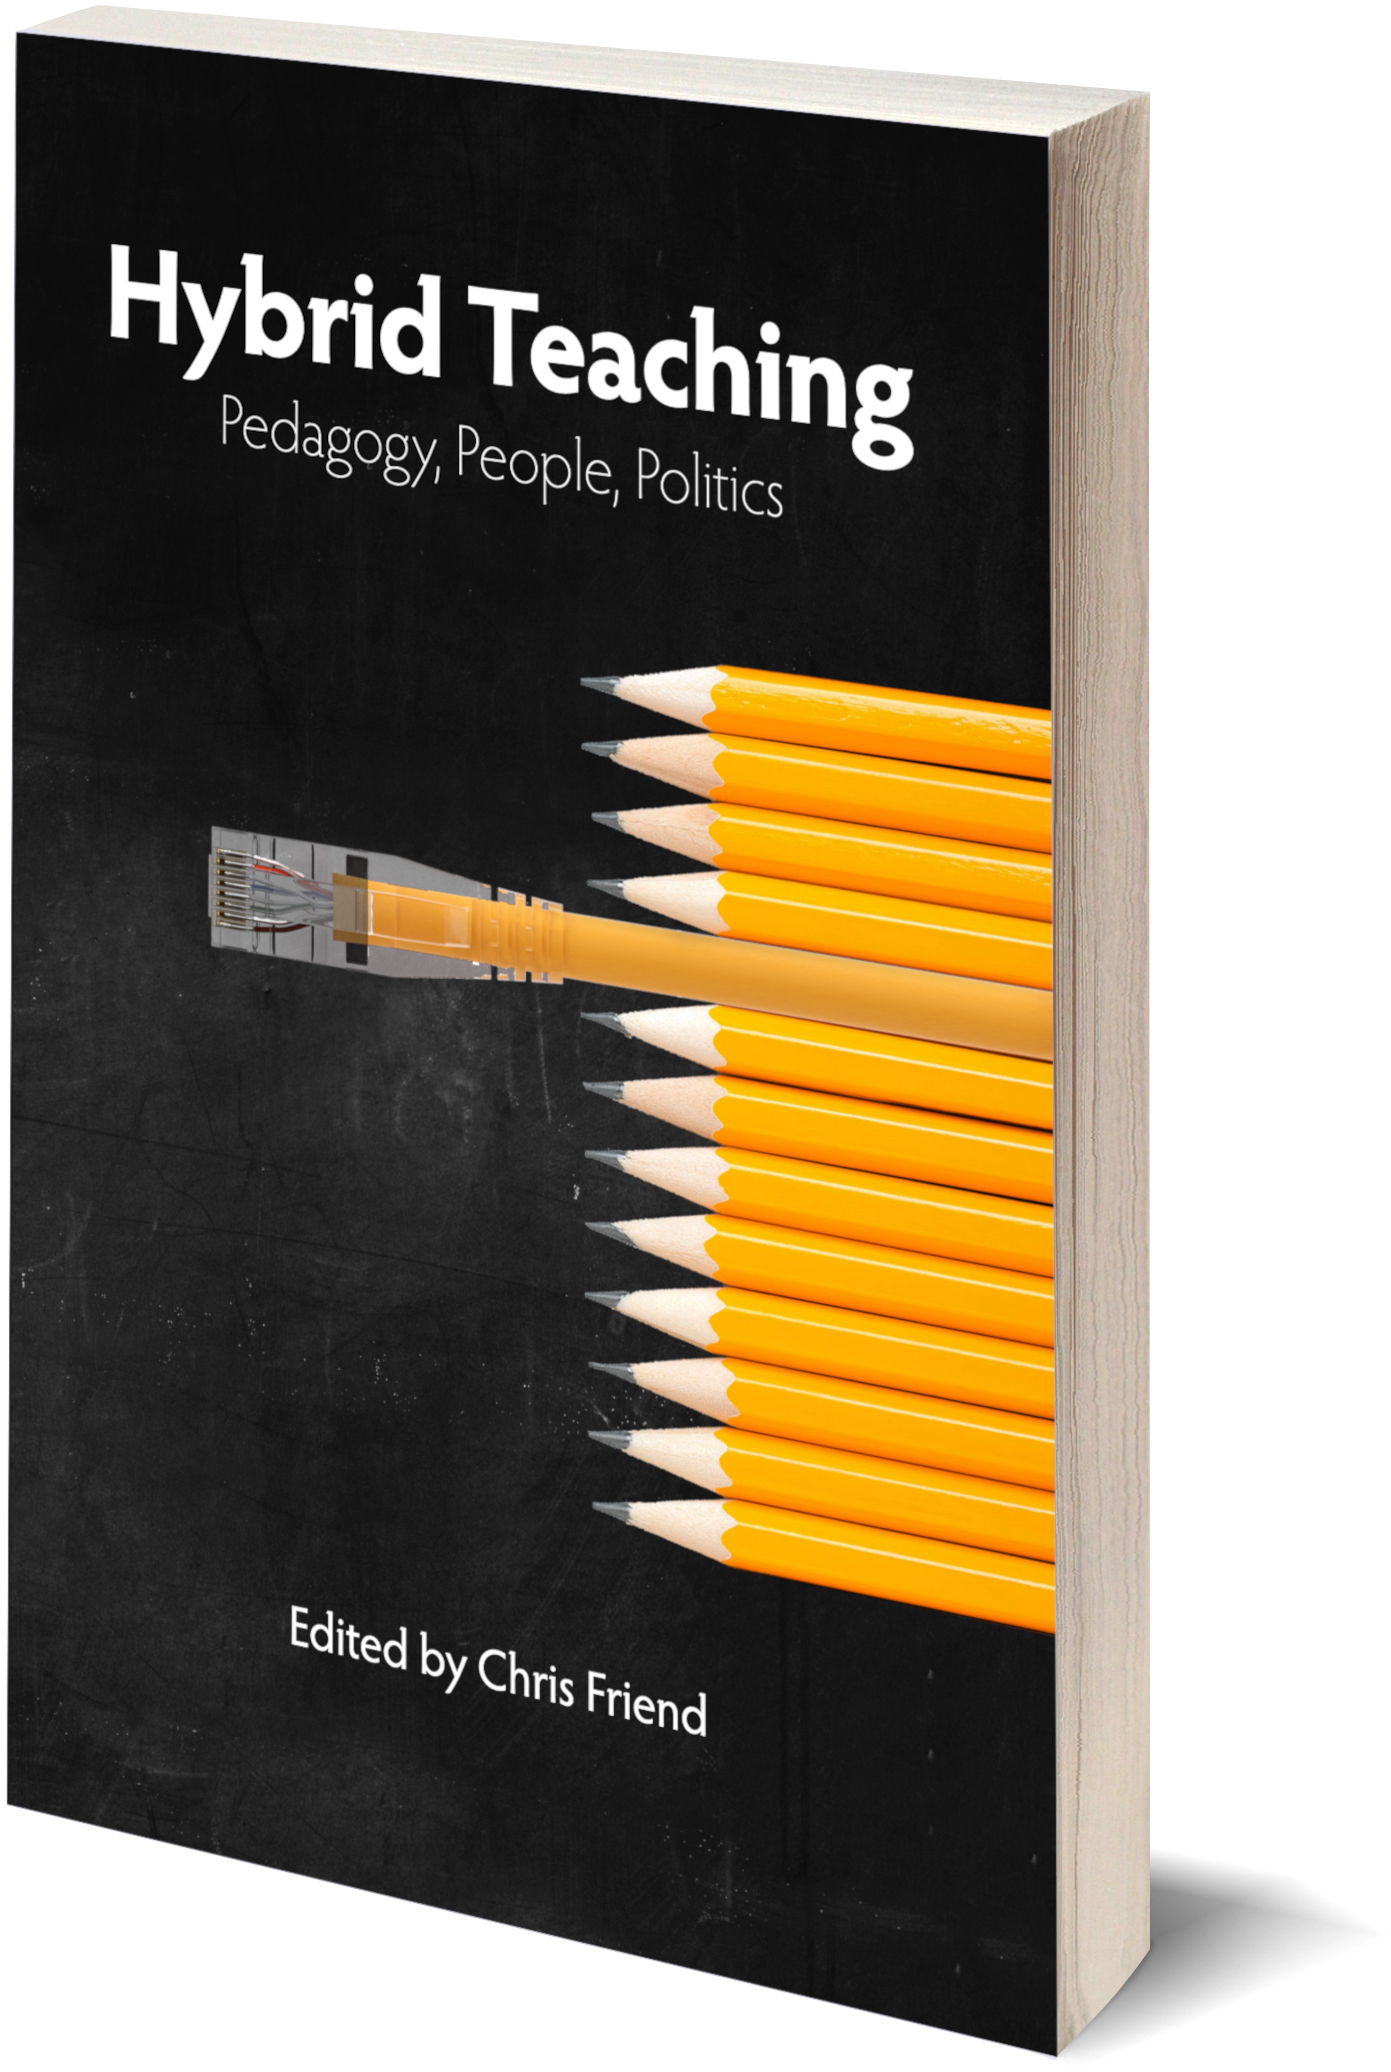 Cover of a book showing pencils lined up with an ethernet cable snuck in